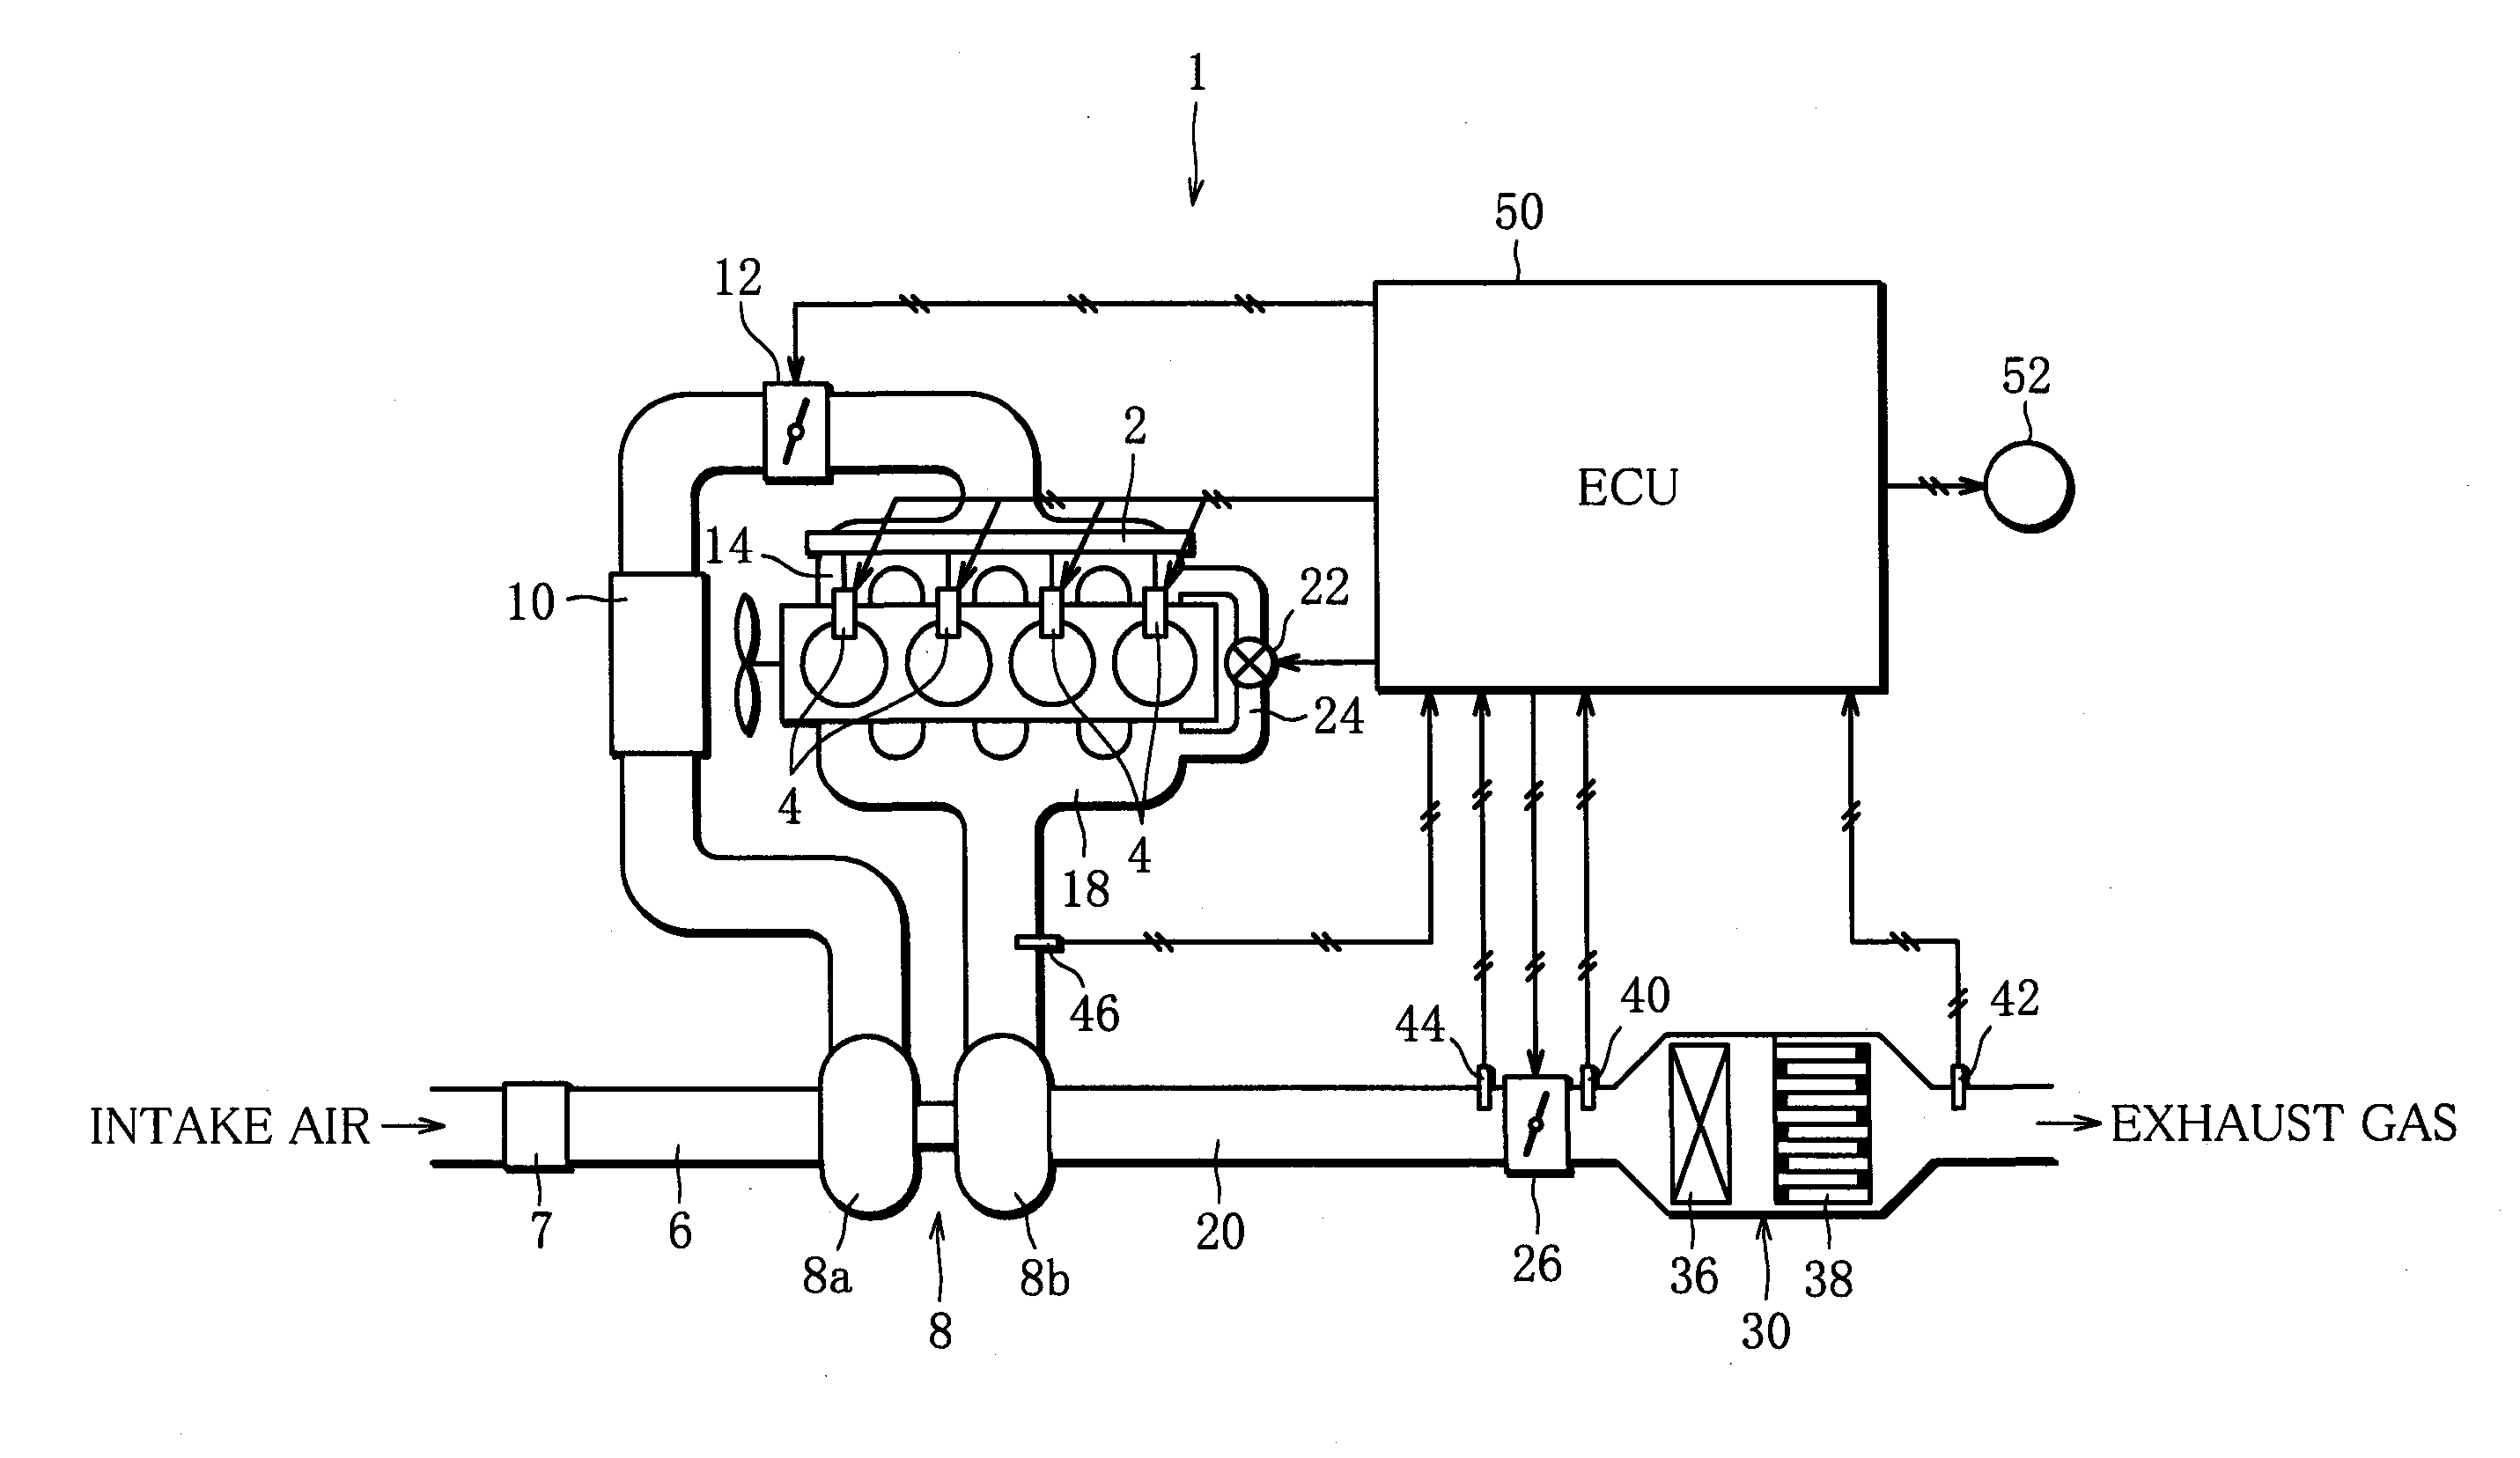 Exhaust aftertreatment device